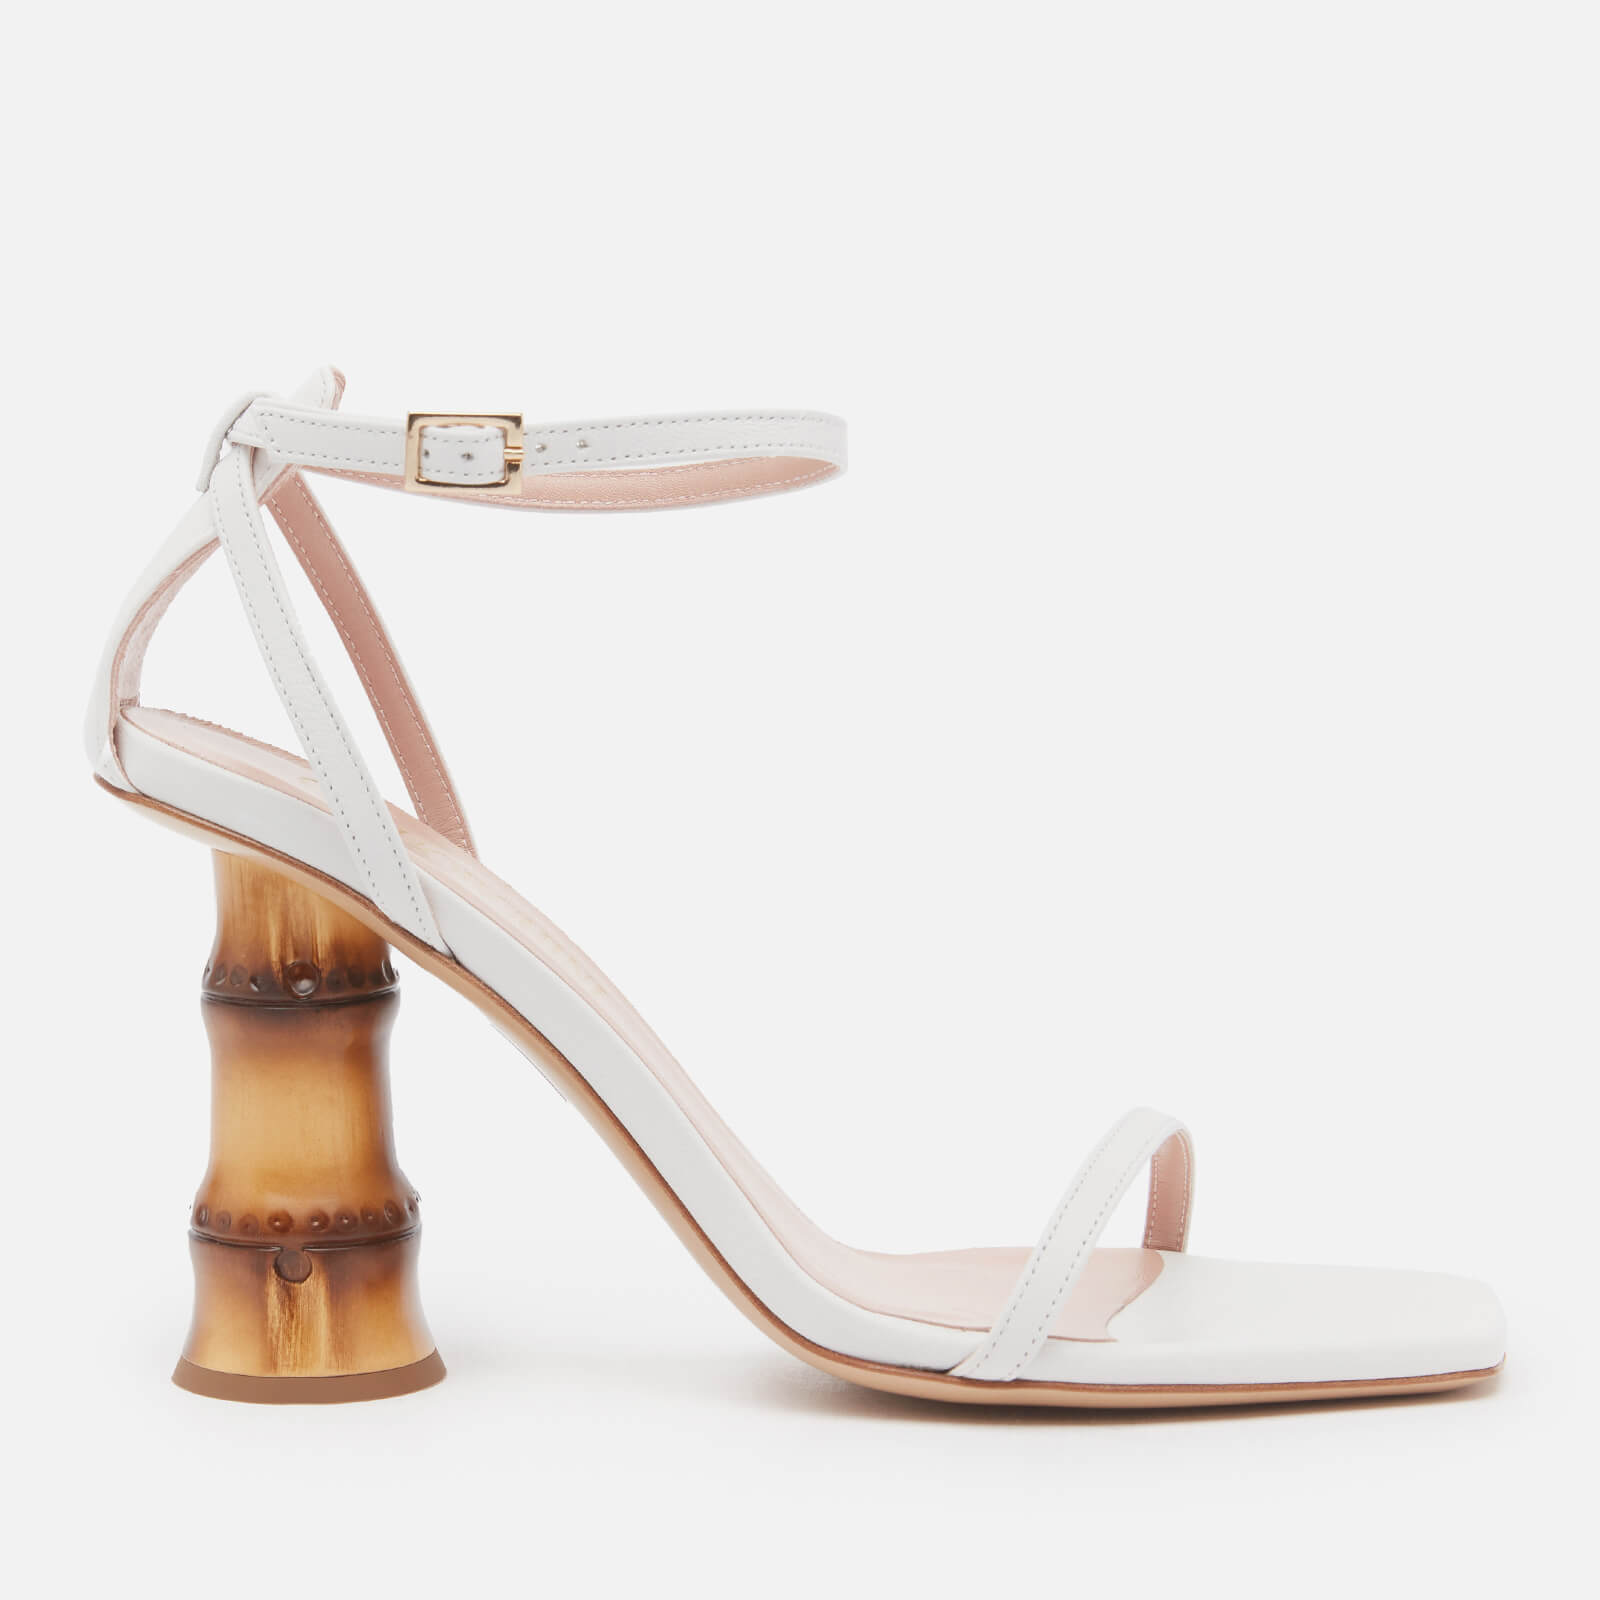 Gia Couture Women's Leather Barely There Heeled Sandals - White - UK 3